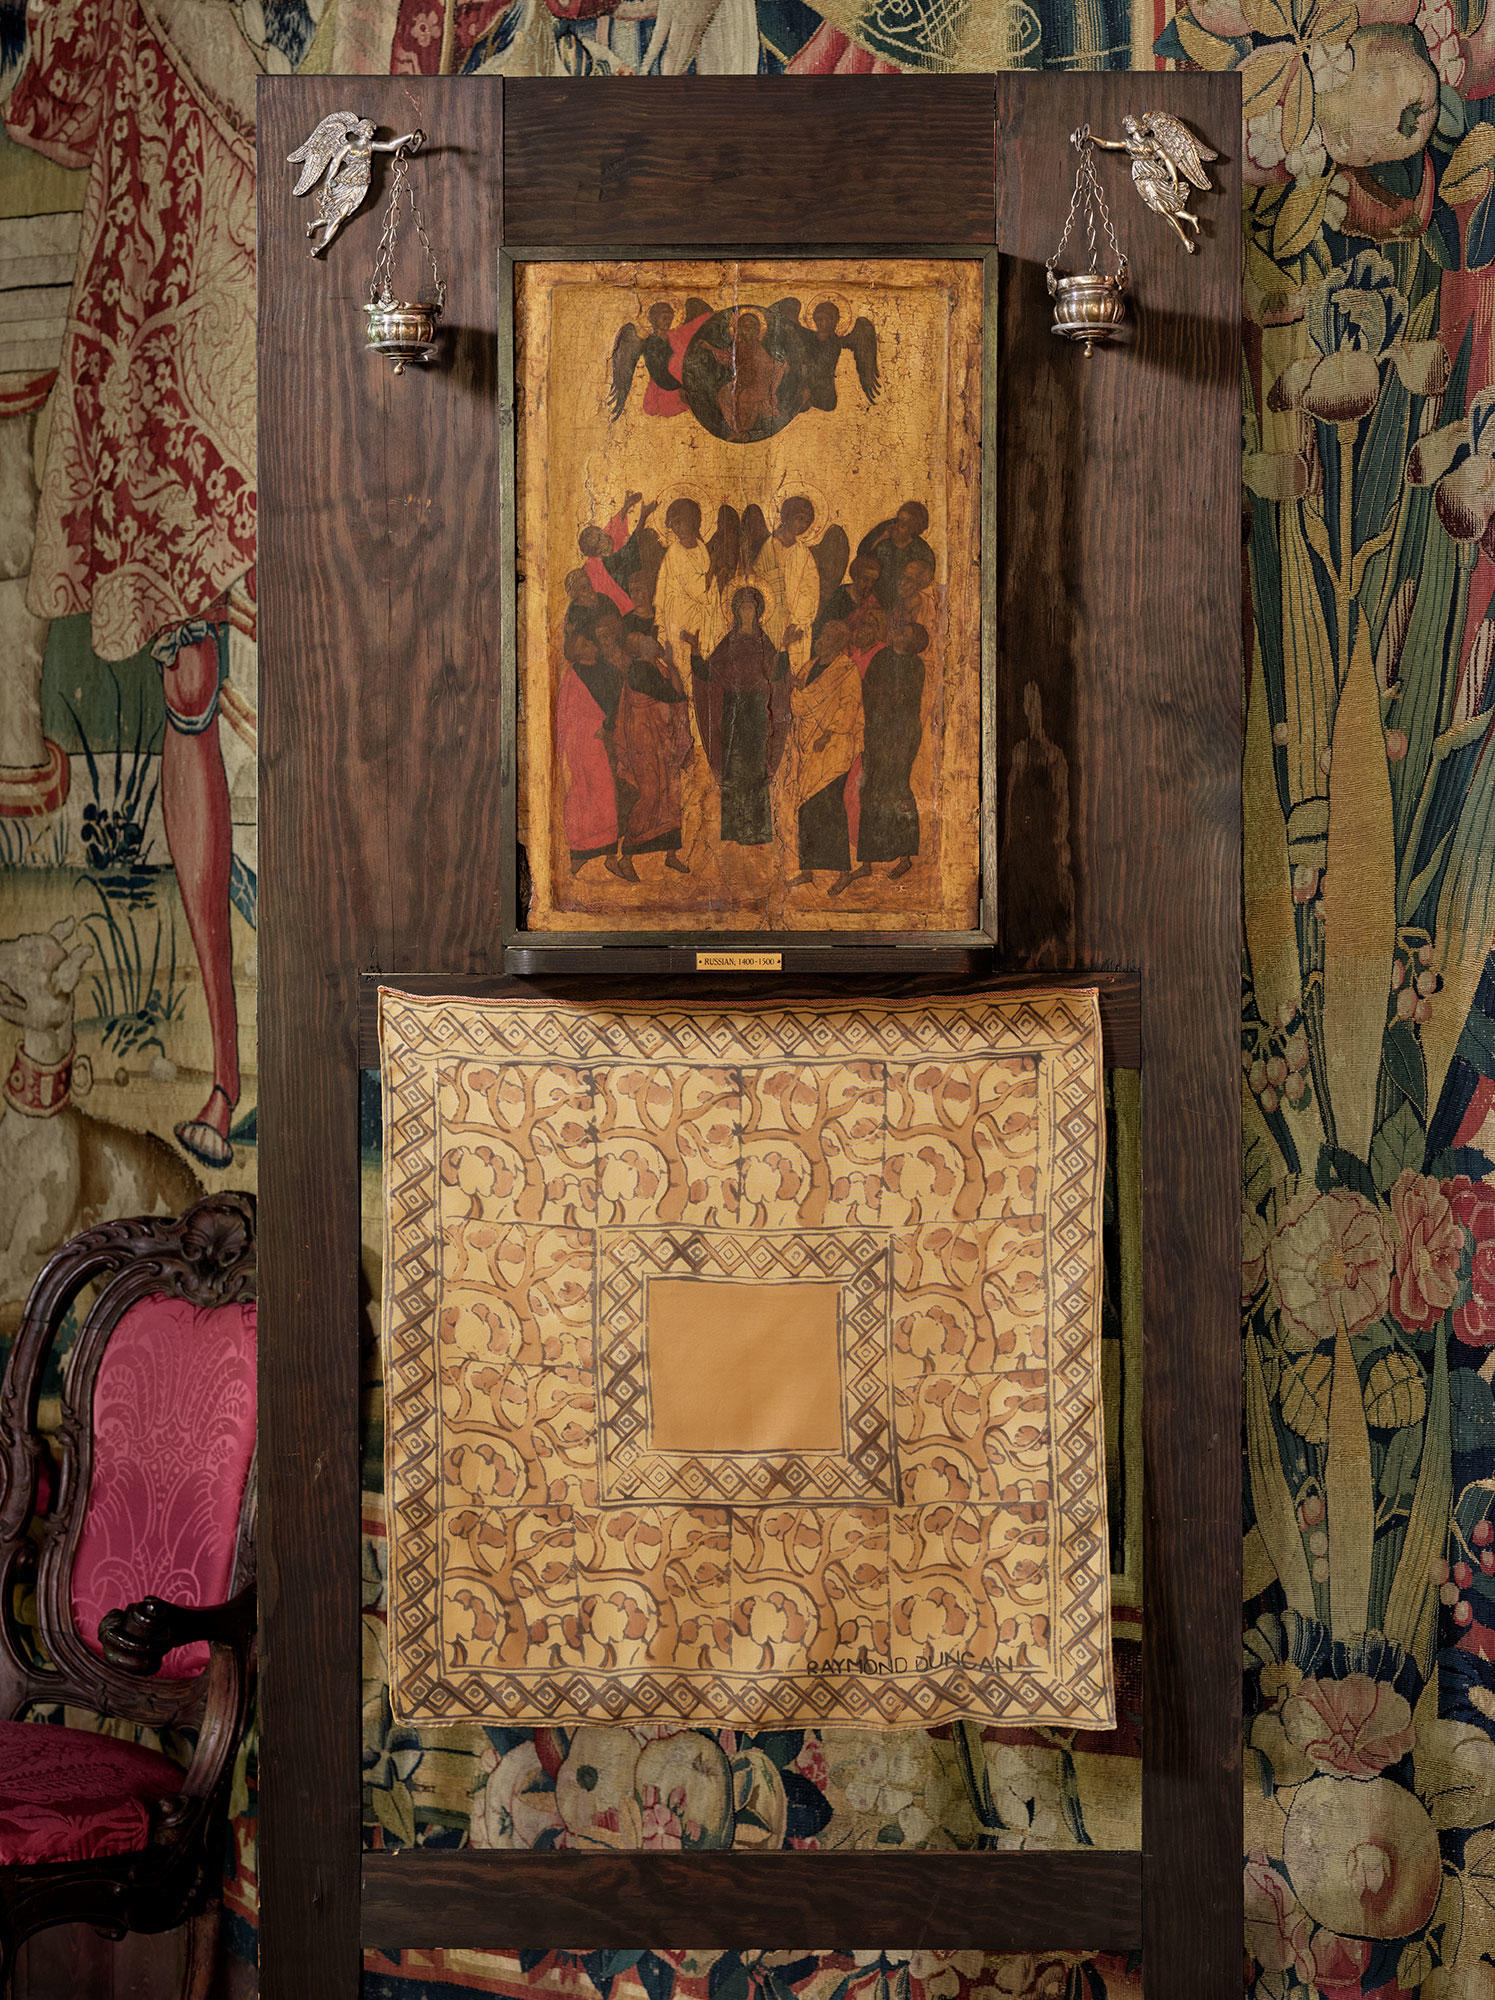 A wooden easel with a painting of the ascension of the Virgin, a pair of silver holy water stoups and a scarf with an abstract design of trees.